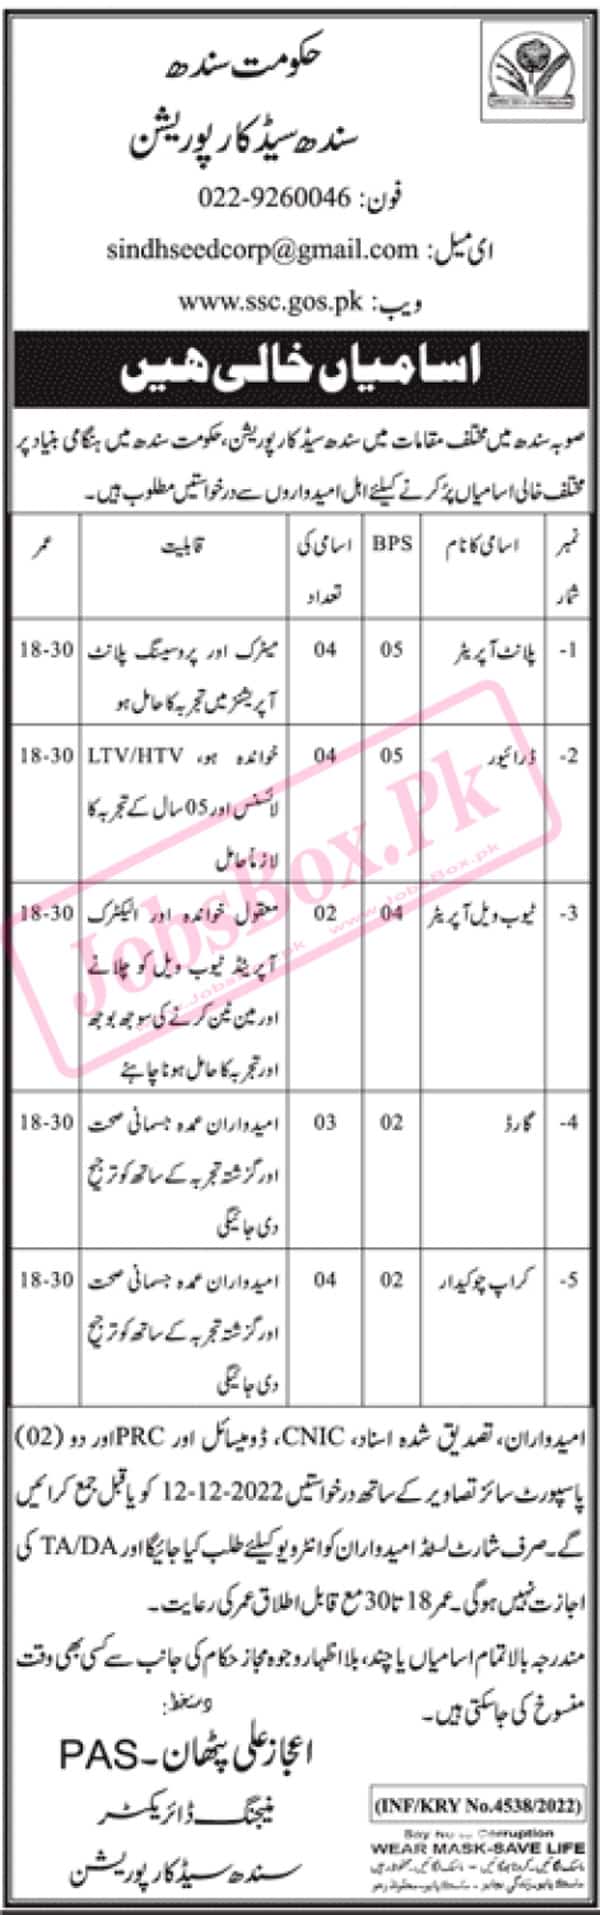 Sindh Seed Corporation Jobs 2022